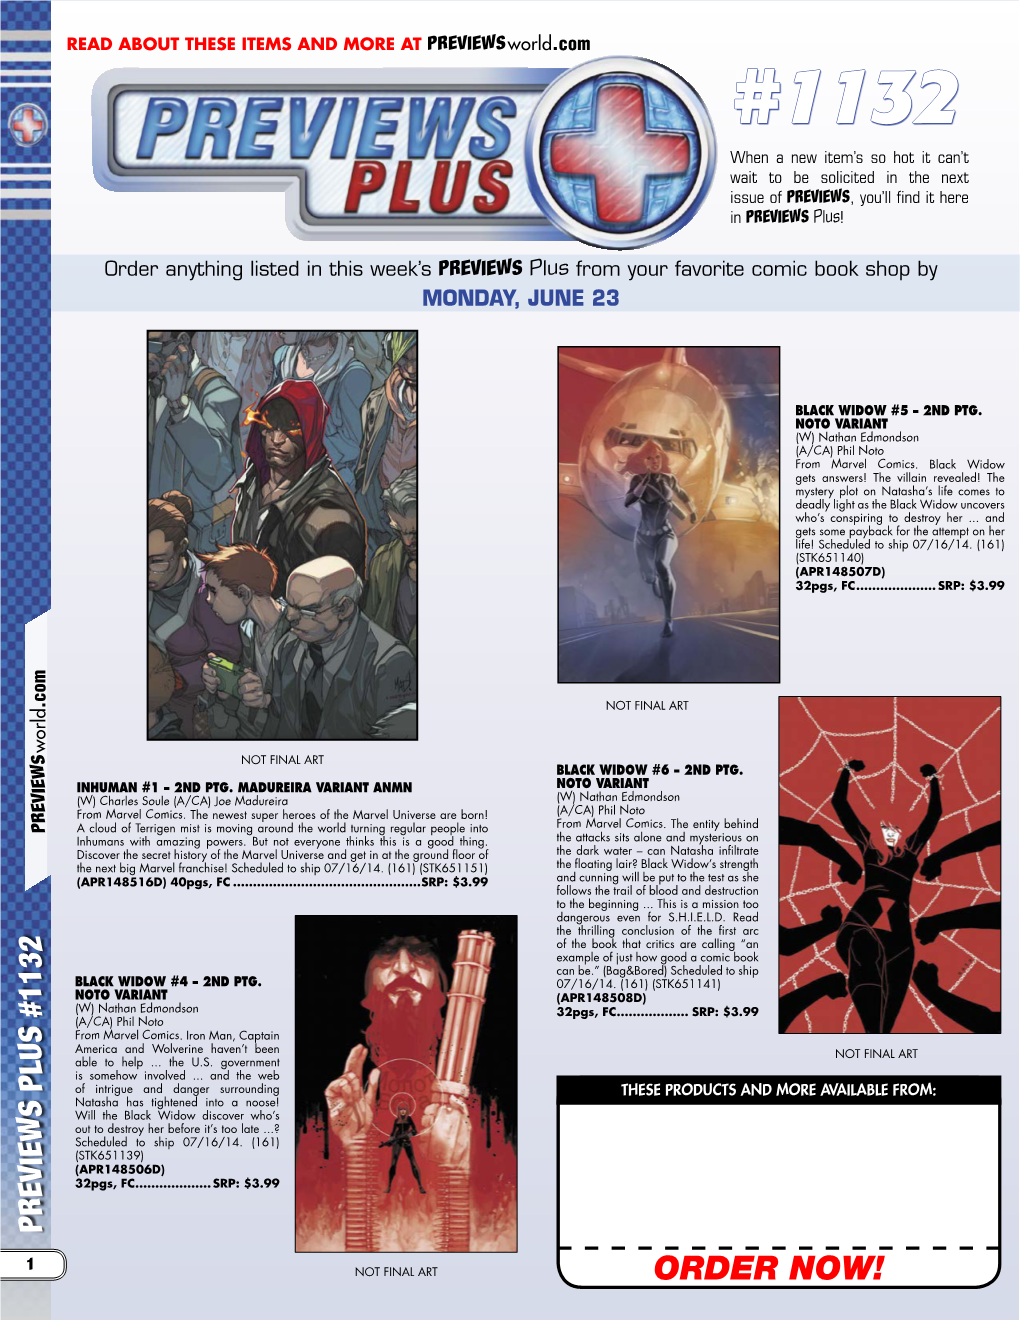 ORDER NOW! 2 PREVIEWS PLUS #1132 Previewsworld.Com 32Pgs, FC��������������������� (APR148510D) (161) (STK651143) They Want.Scheduledtoship07/16/14